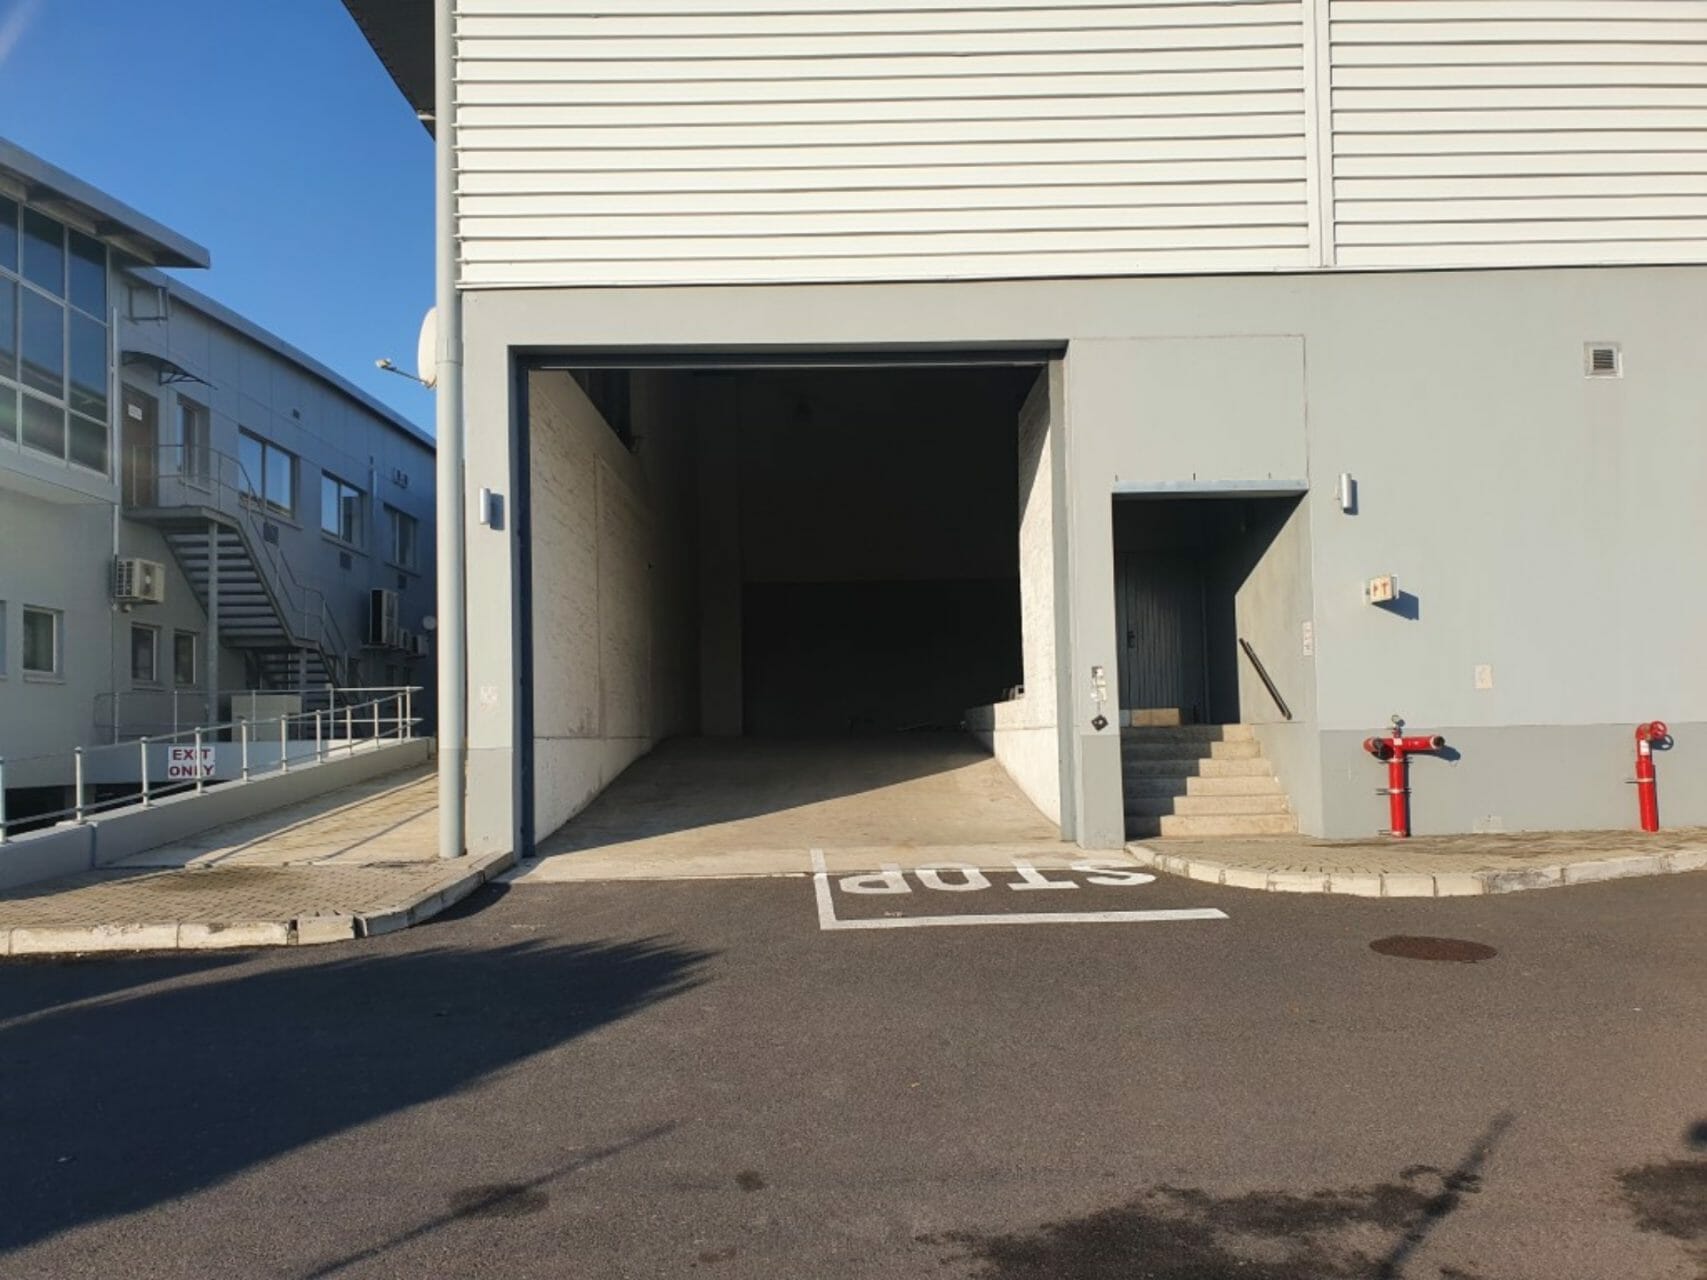 726m² – Eagle Park warehouse to let in Montague Gardens